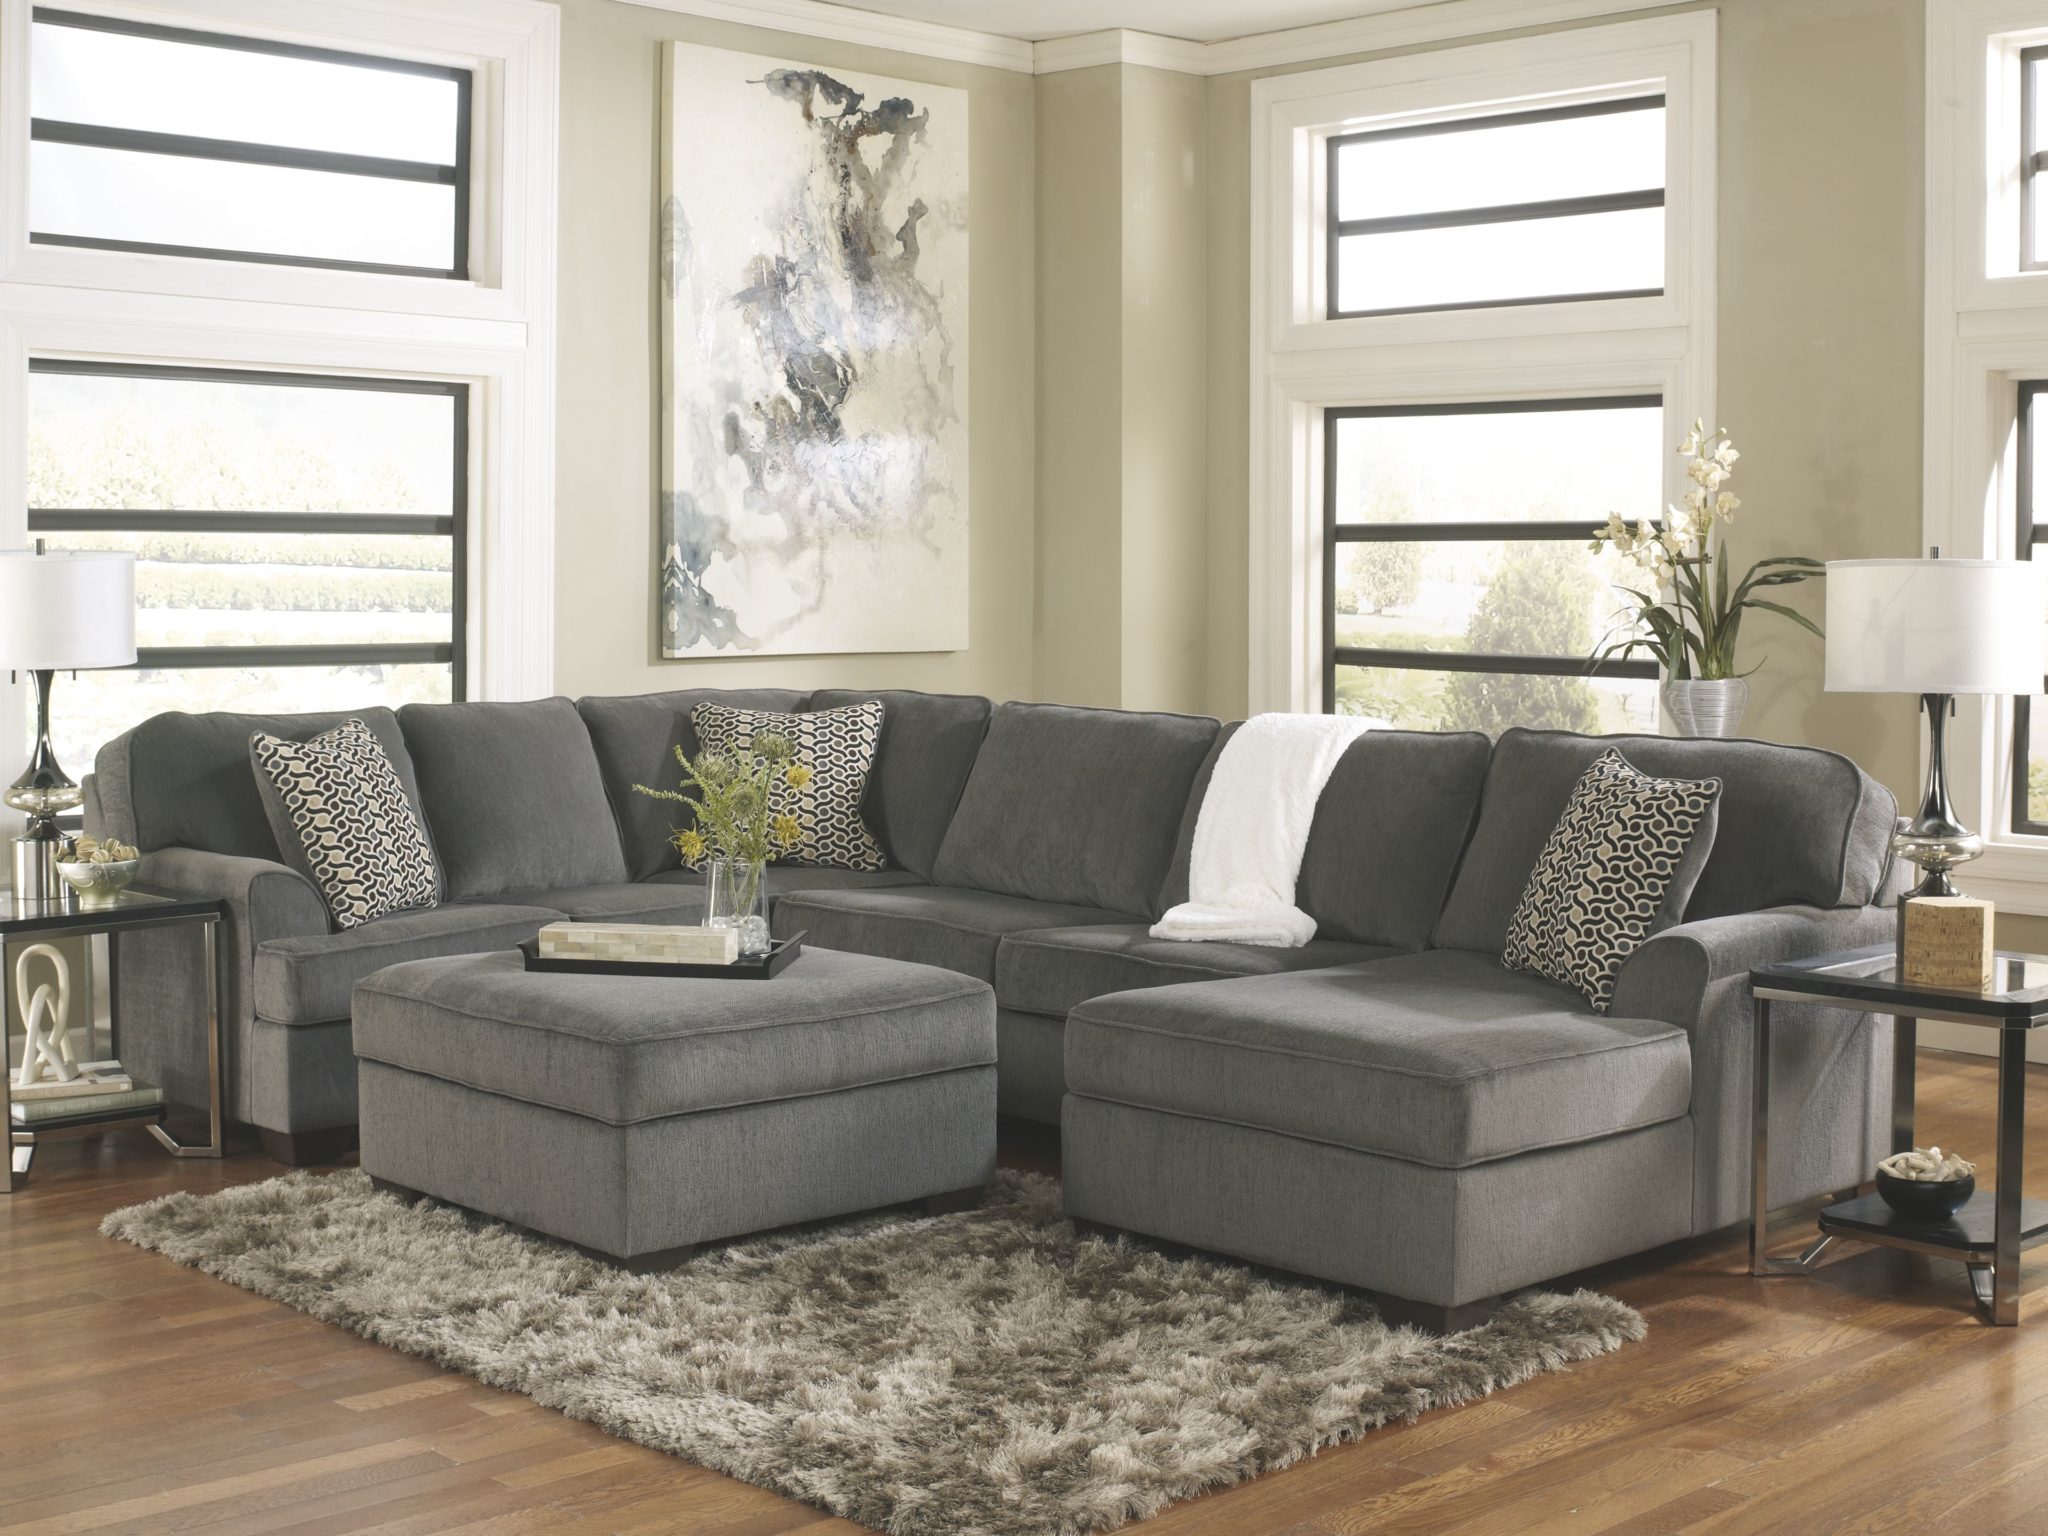 Living Room Ideas With Couch And Loveseat